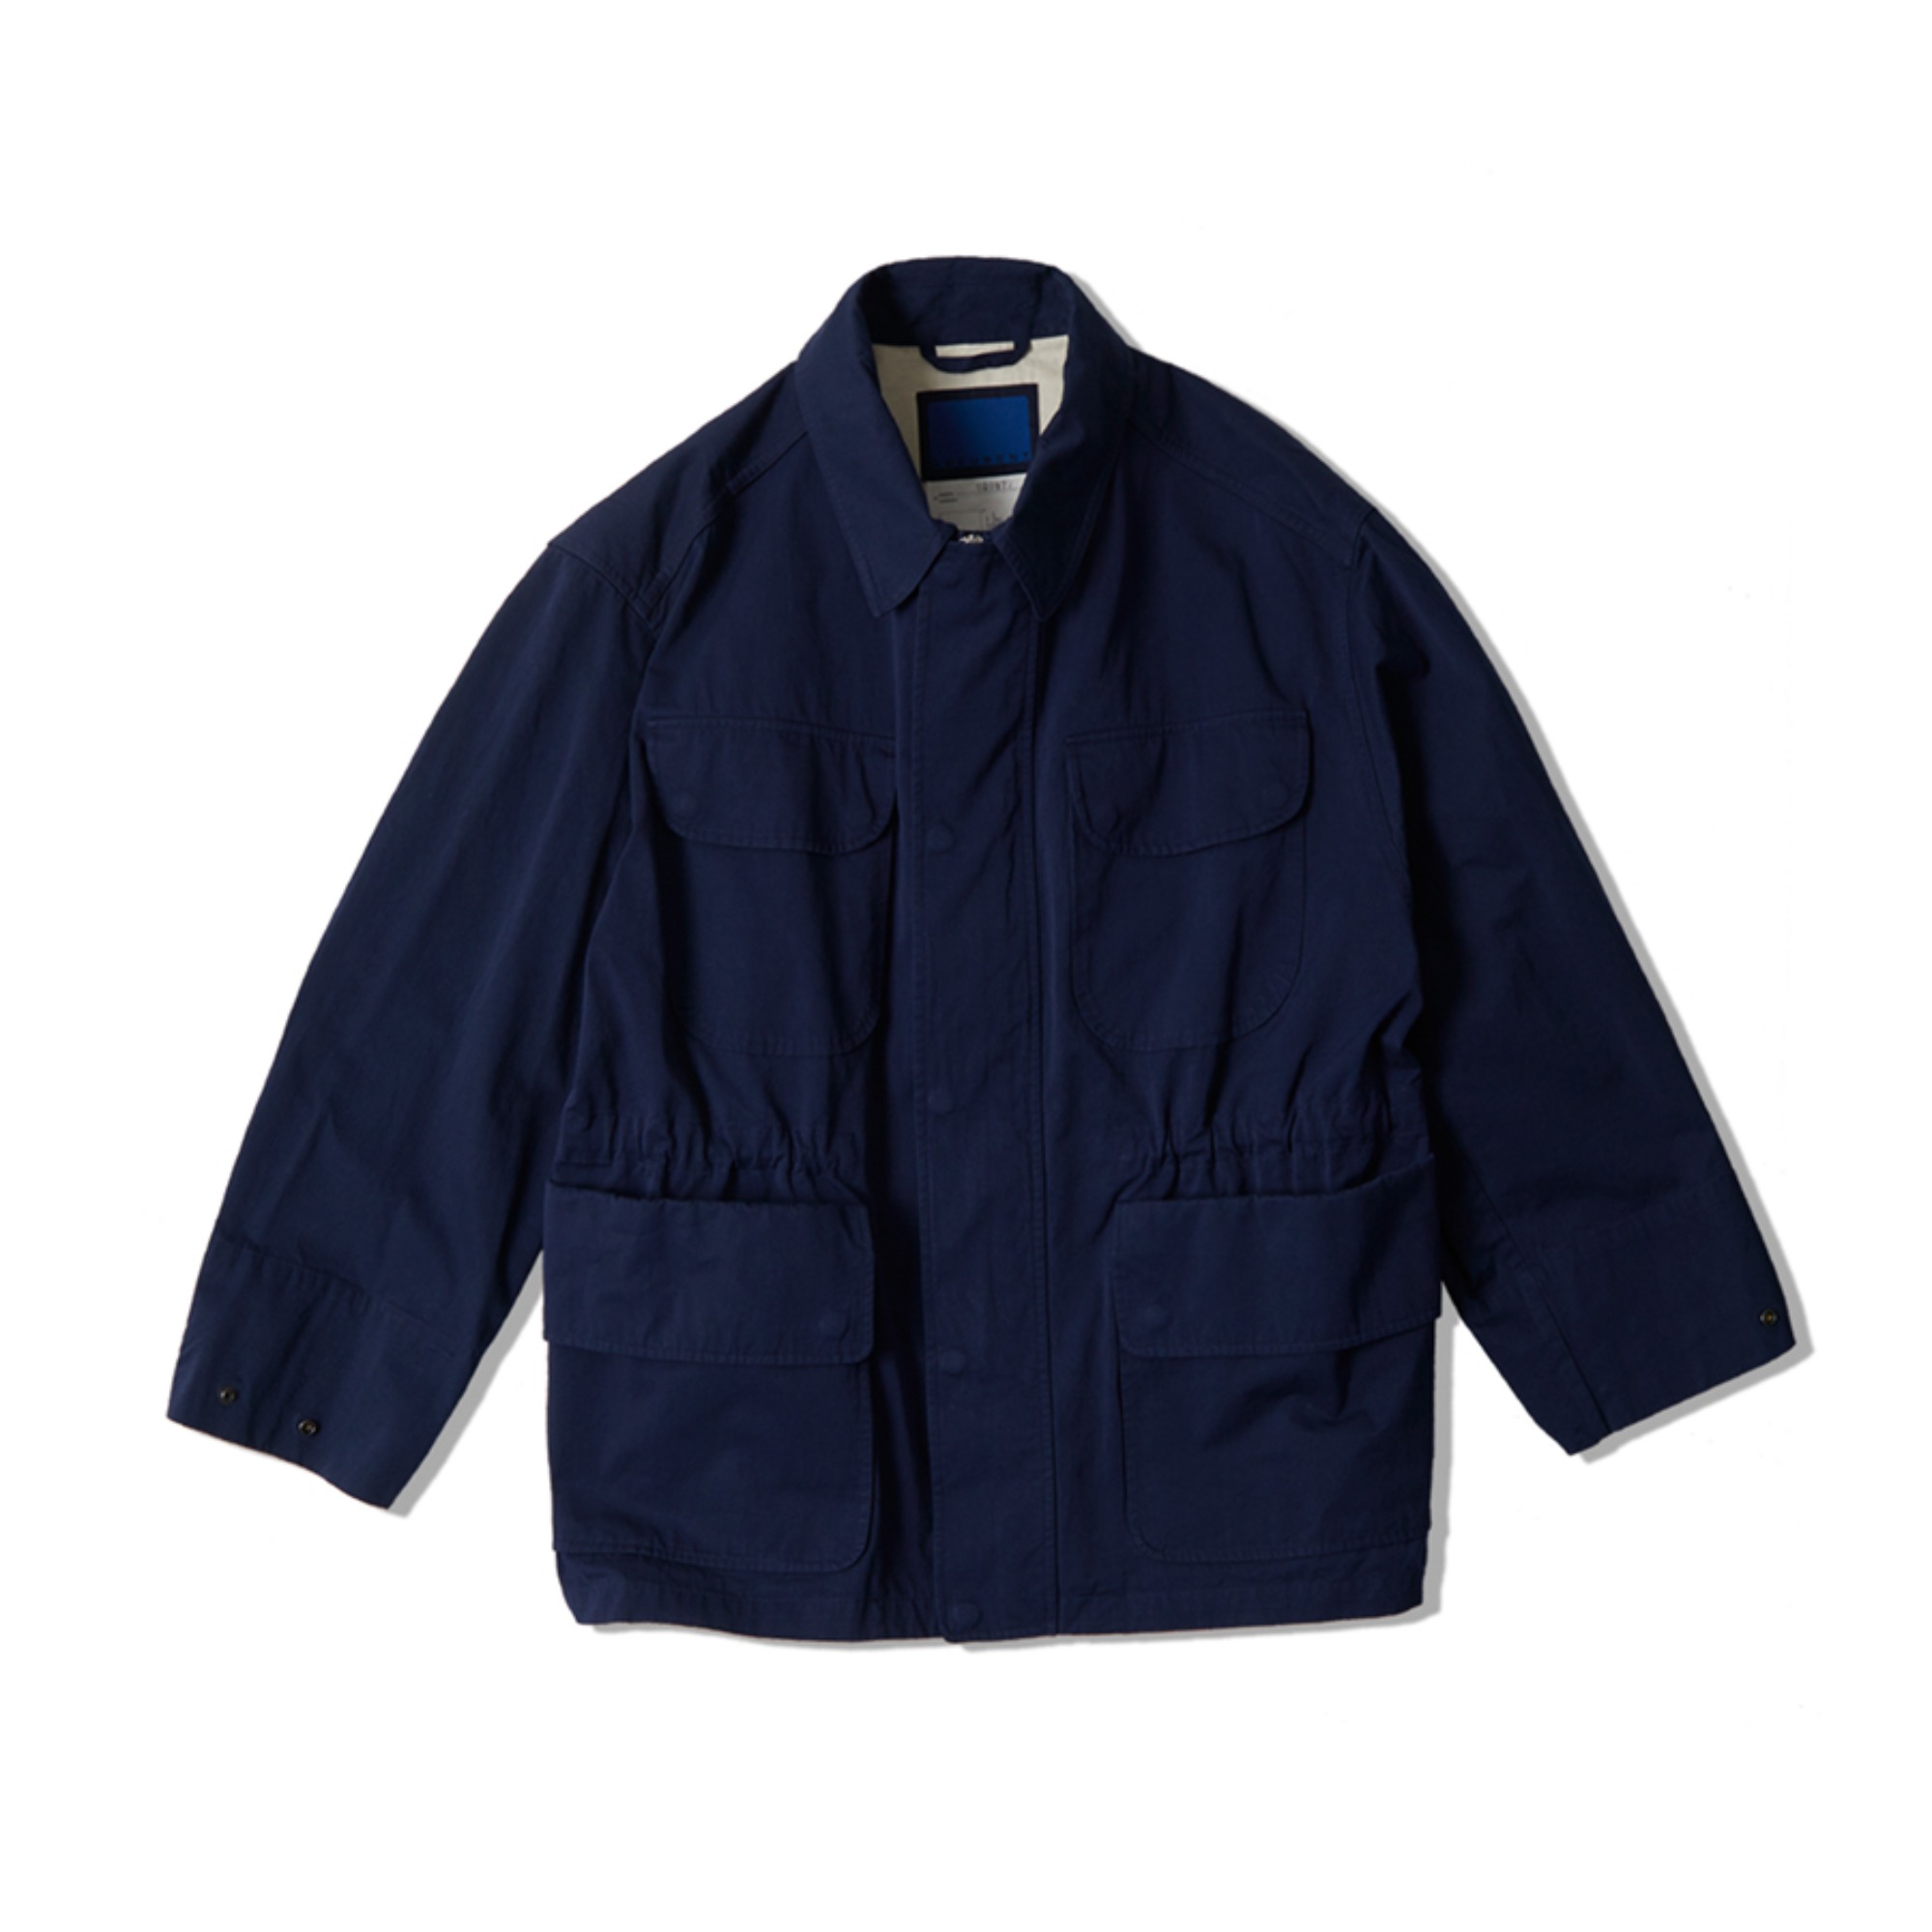 THE DOCUMENT FIELD JACKET (BLUE)